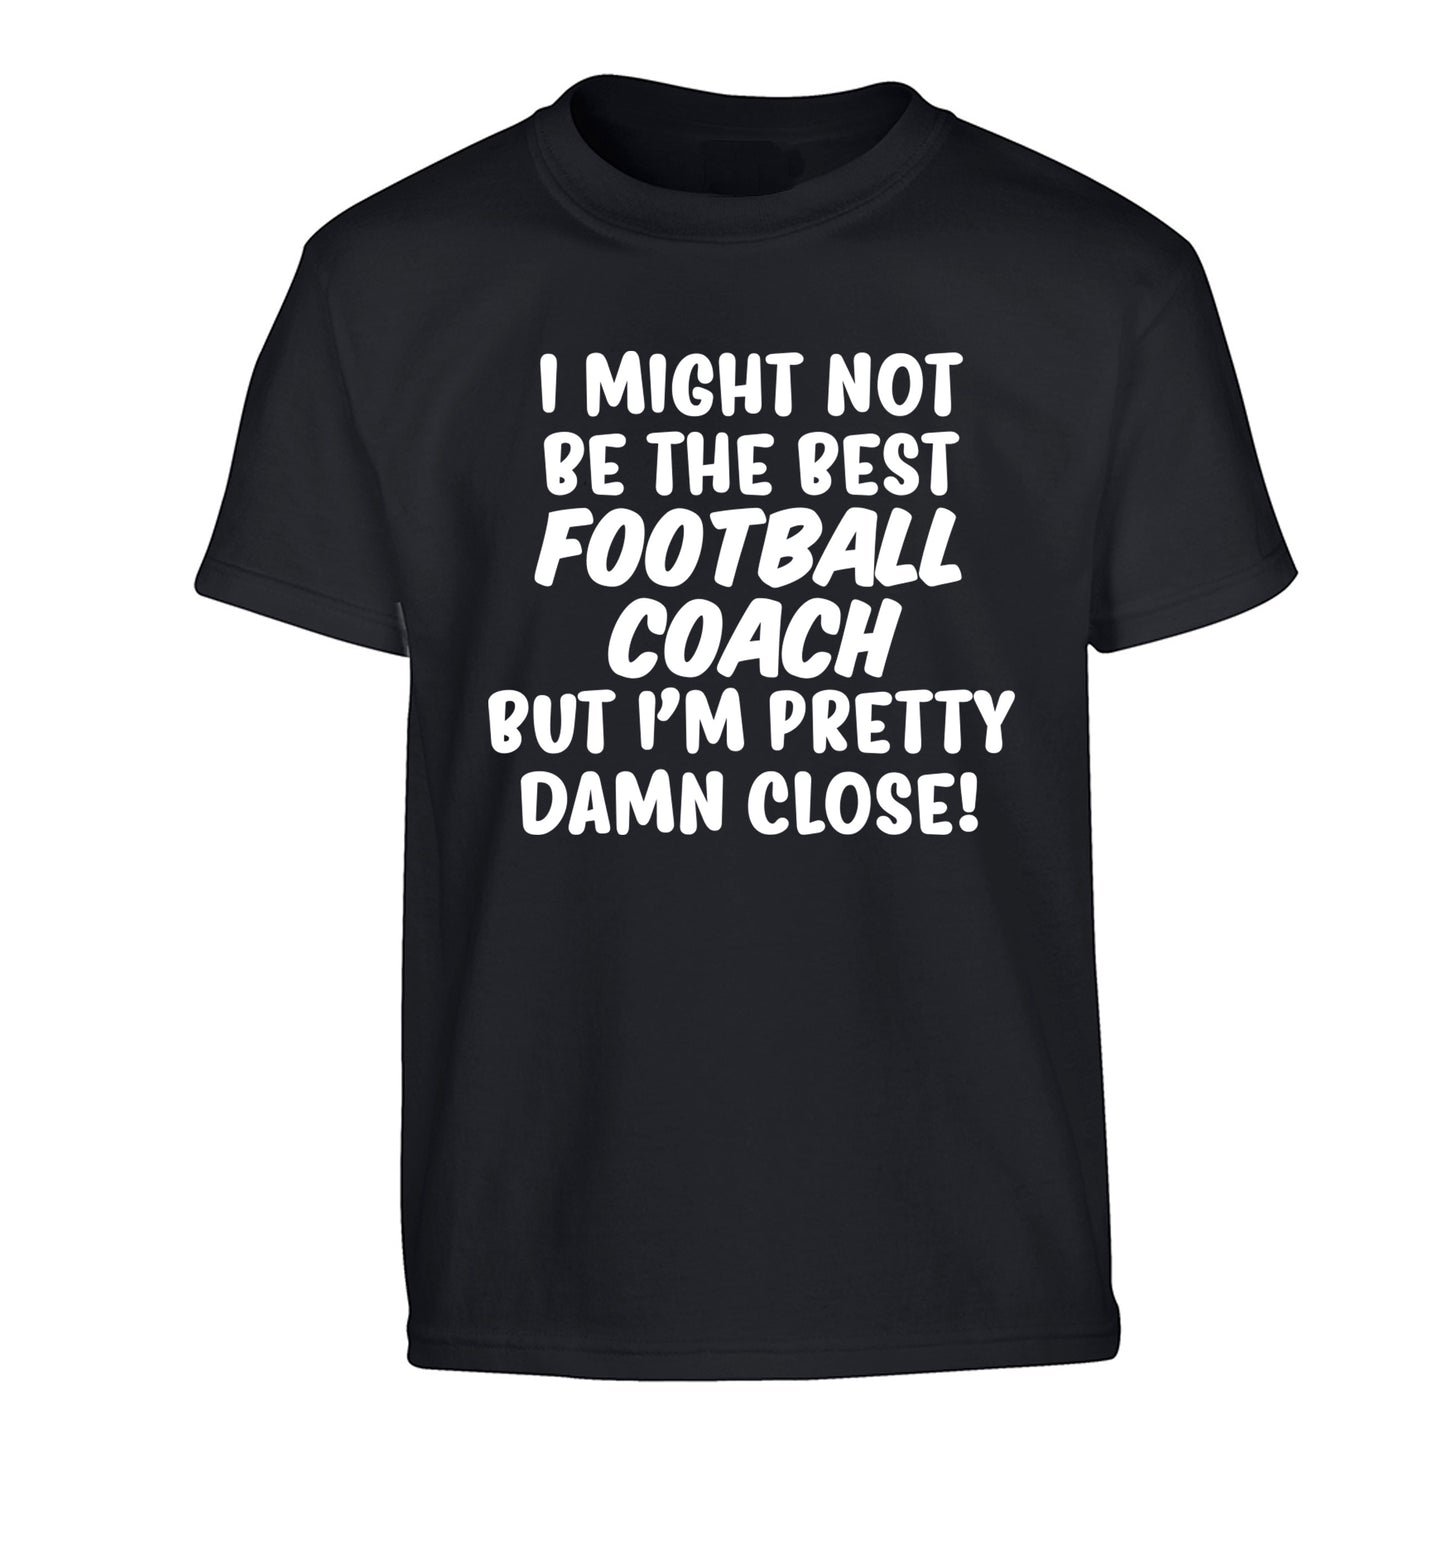 I might not be the best football coach but I'm pretty close! Children's black Tshirt 12-14 Years